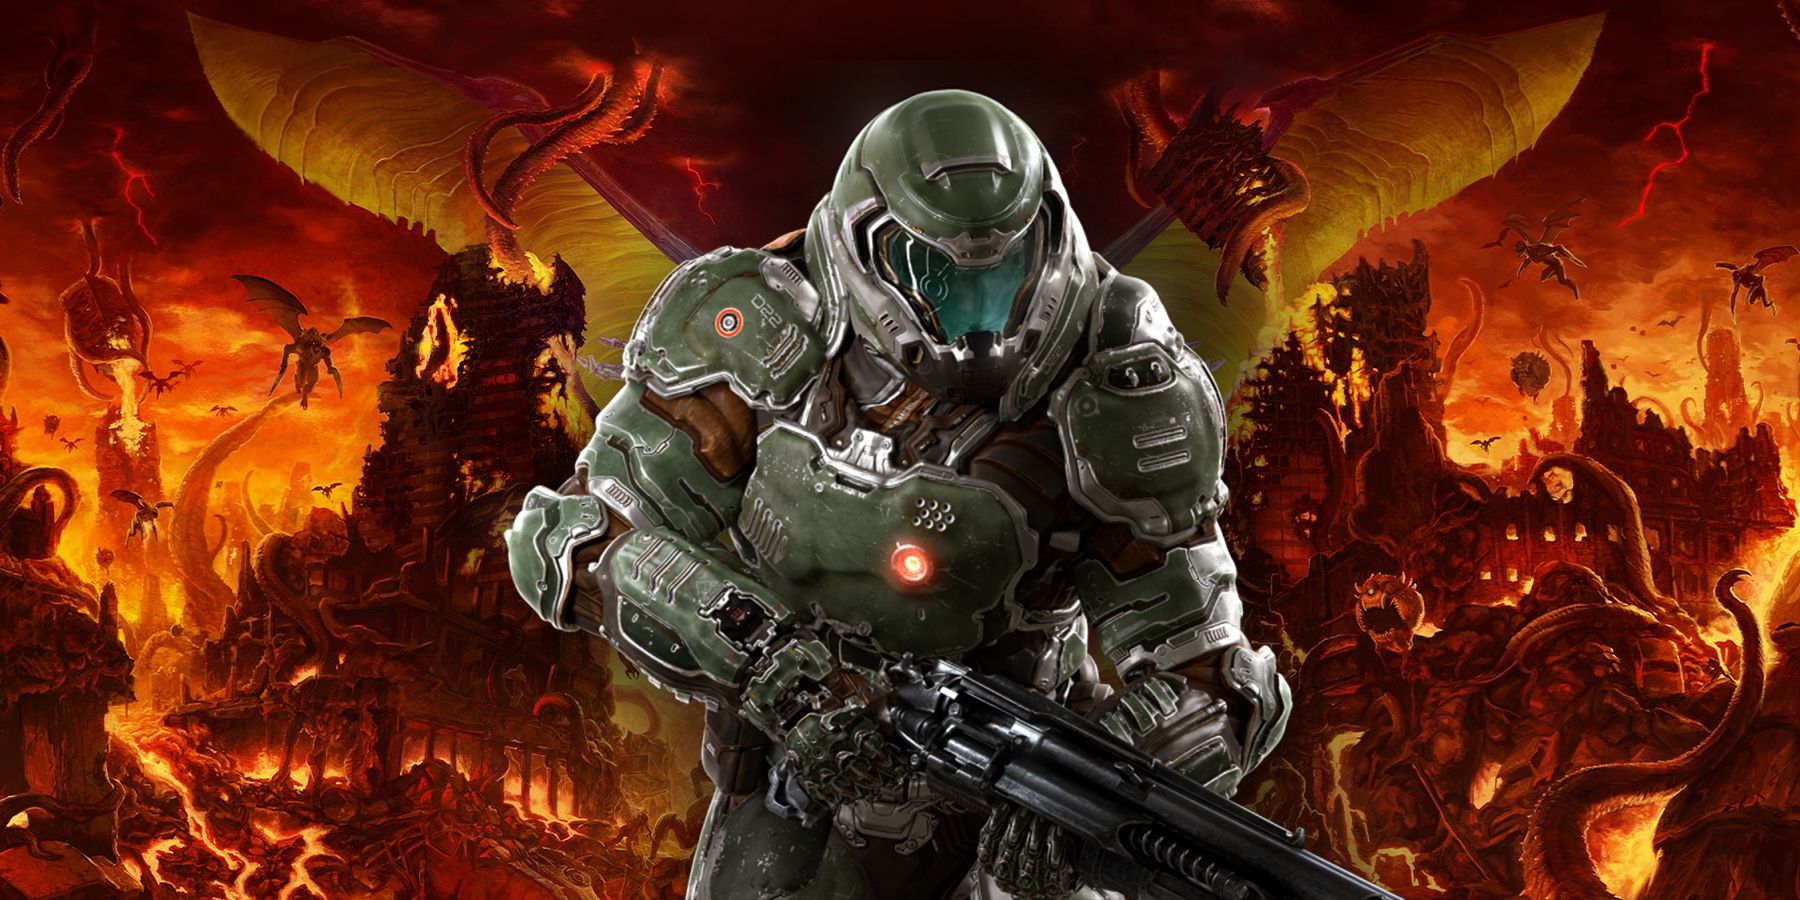 What are 3 ways Doom Slayer can kill Master Chief? - Quora